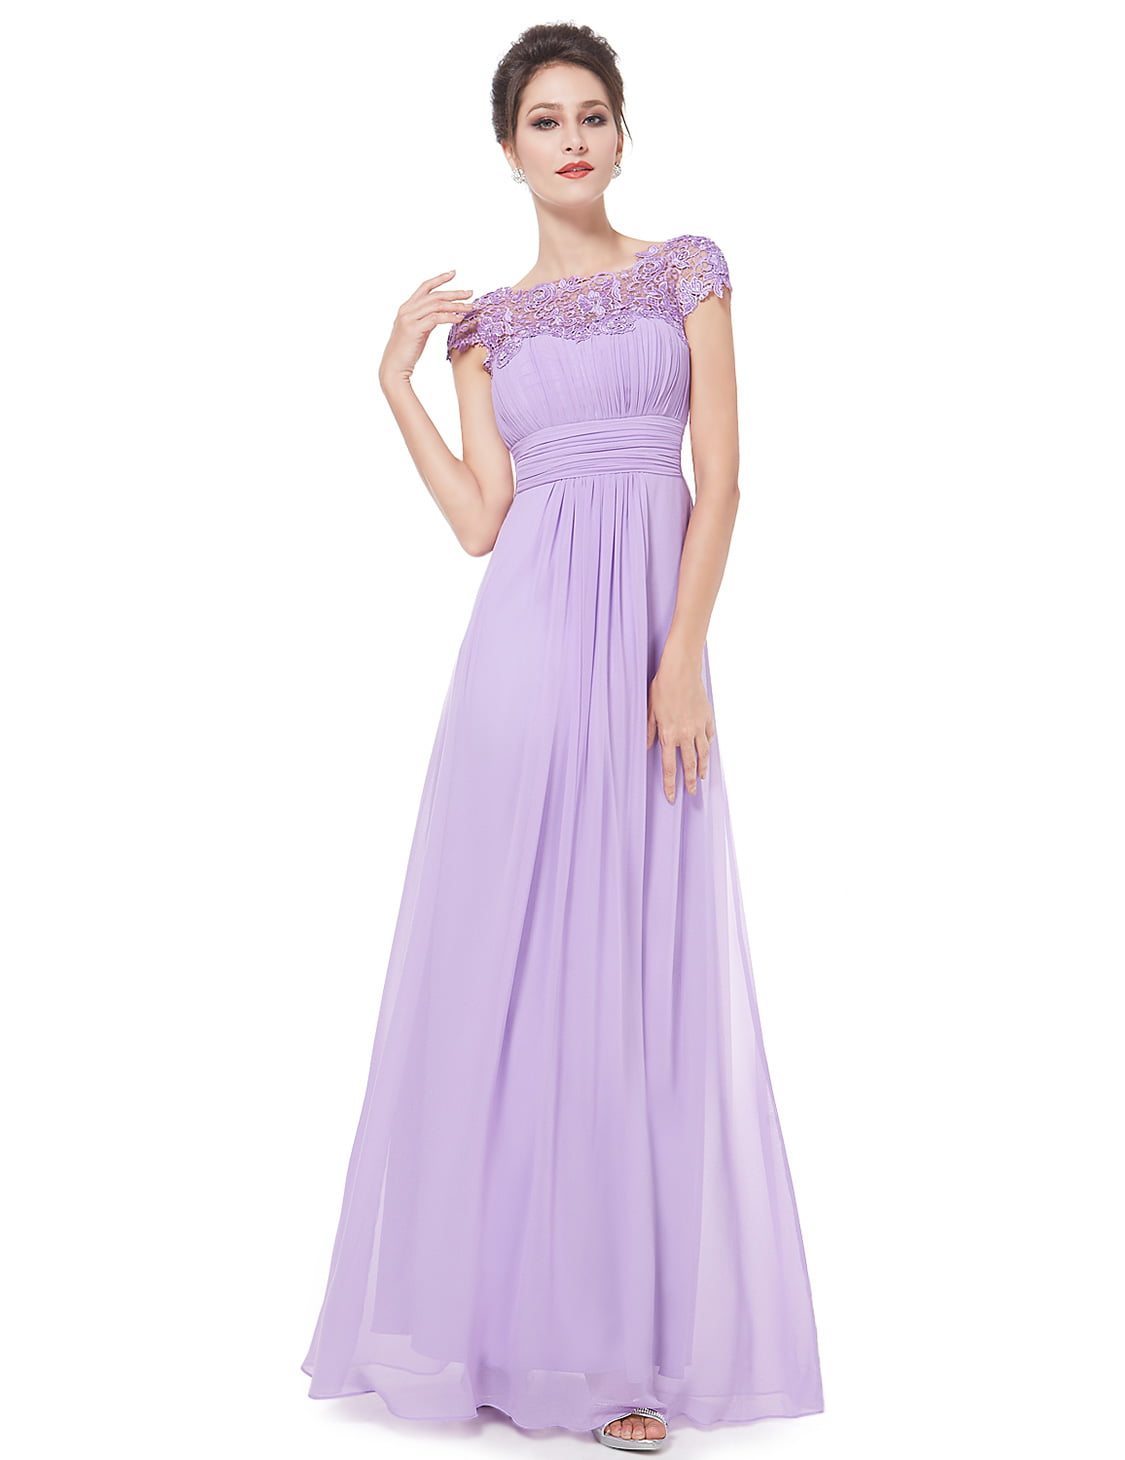 UK Chiffon Long Formal Wedding Evening Ball Gown Party Prom Bridesmaid Dresses 